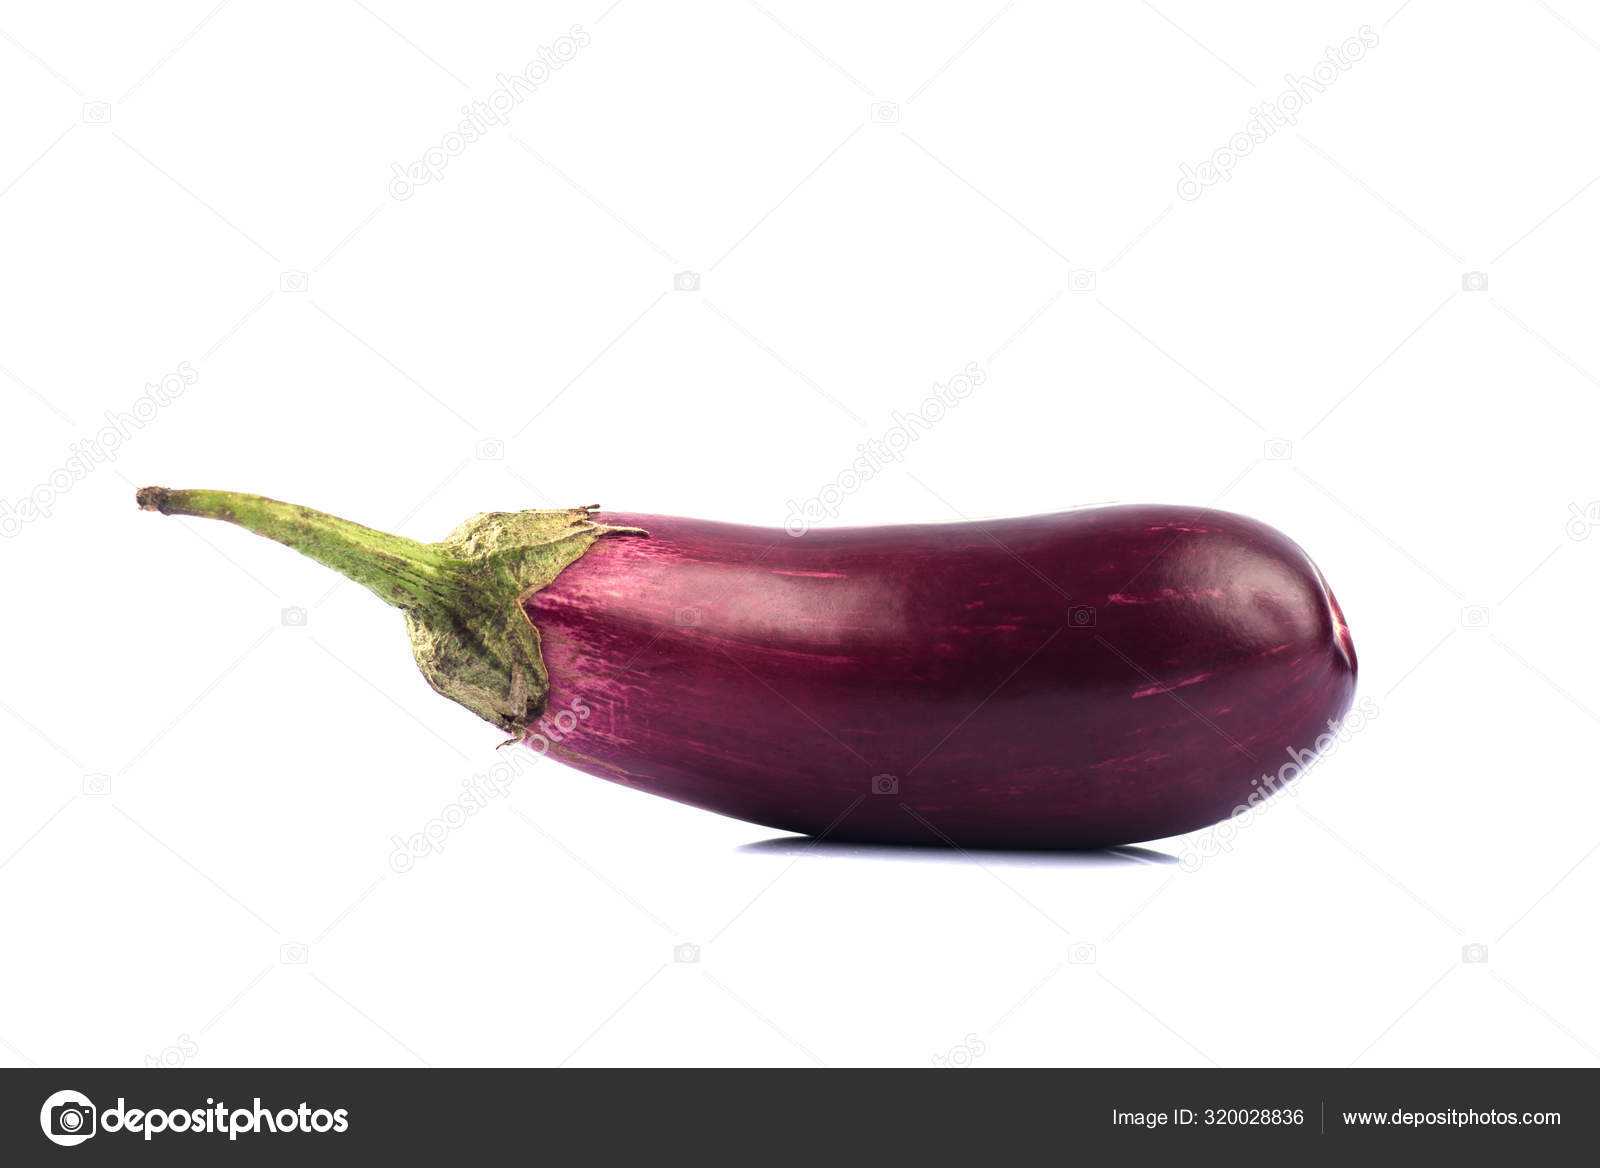 Eggplant or aubergine or brinjal vegetable isolated on a white background.  Stock Photo by ©DipakShelare 320028836